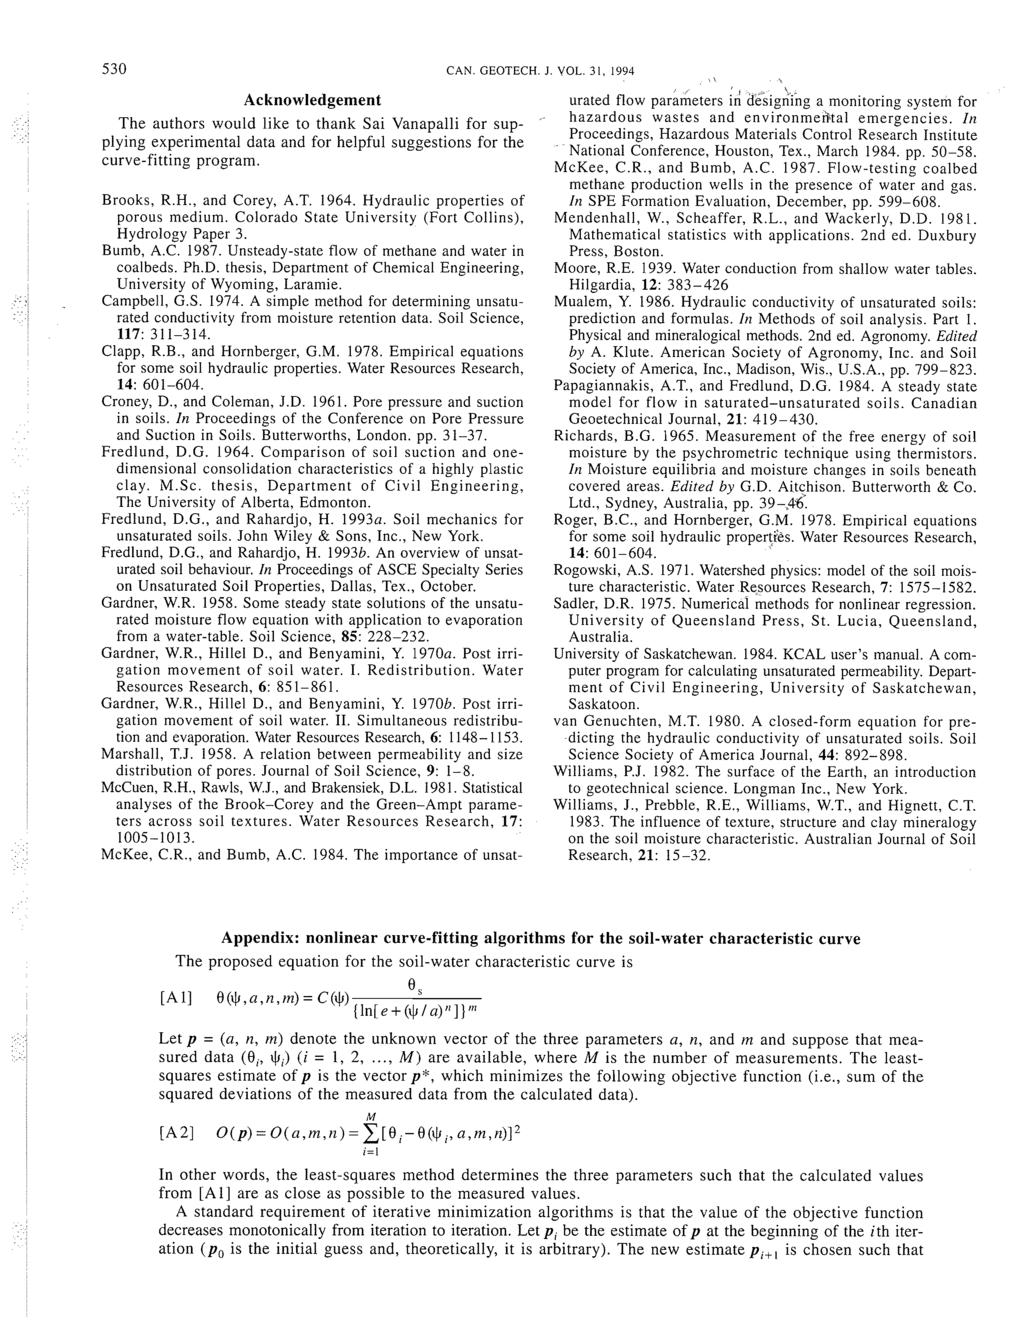 530 CAN. GEOTECH. J. VOL. 31, 1994 Acknowledgement The authors would like to thank Sai Vanapalli for supplying experimental data and for helpful suggestions for the curve-fitting program. Brooks, R.H., and Corey, A.